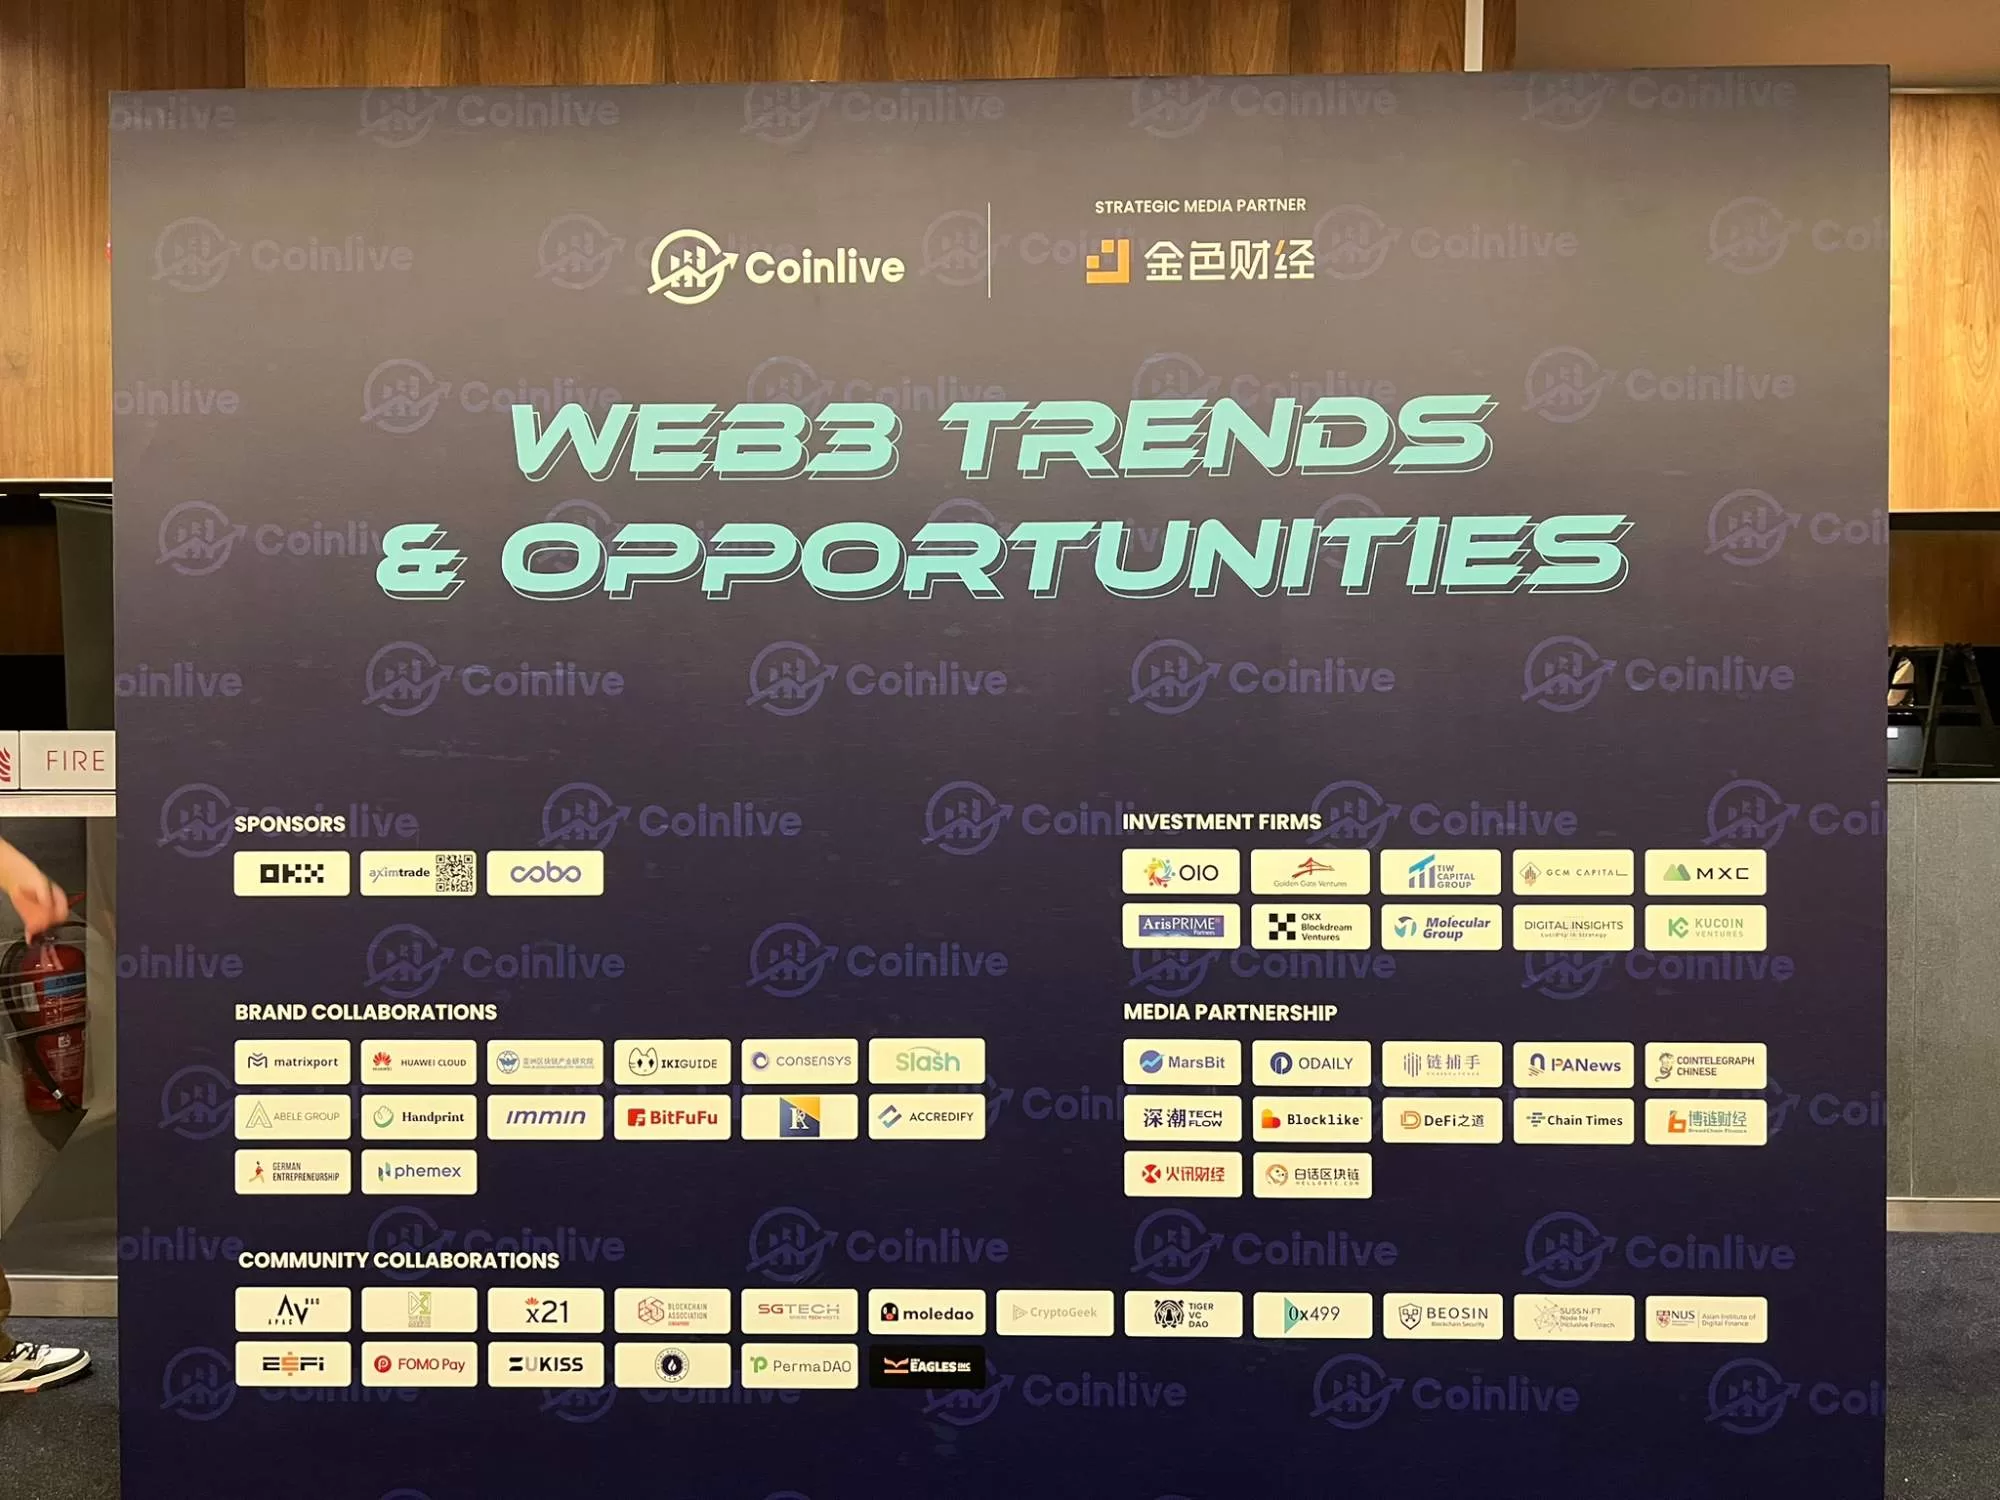 Web3 Trends & Opportunities: Coinlive’s Very First Grand-Scale Summit